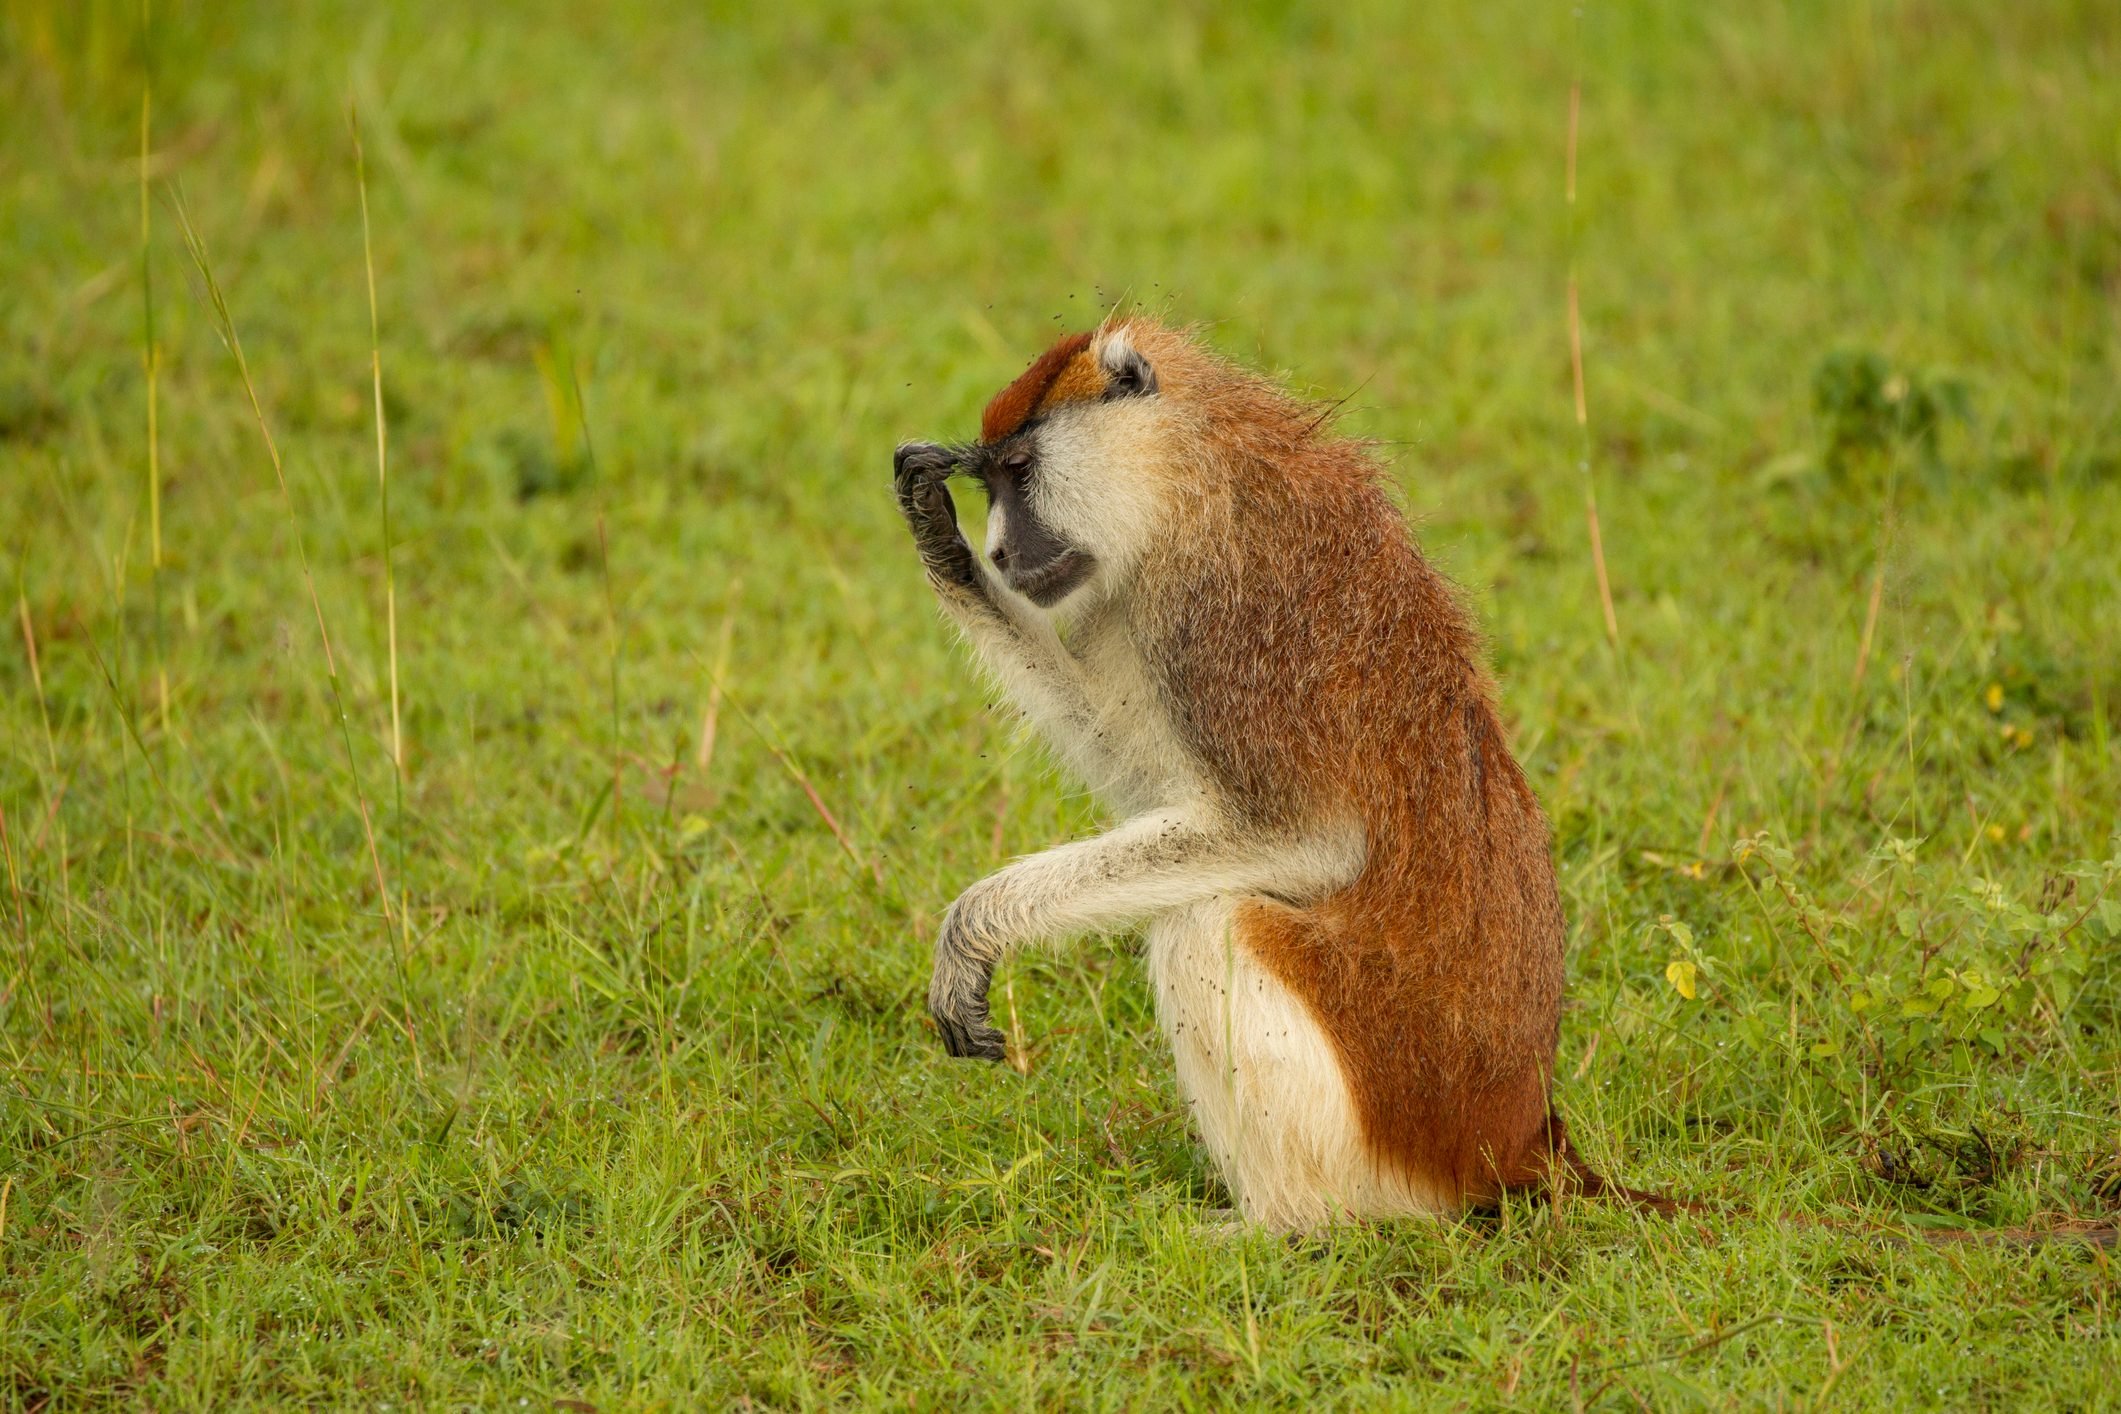 Patas Monkey (erythrocebus patas) sitting up with hand on forehead, portrait, Murchison Falls National Park, Uganda